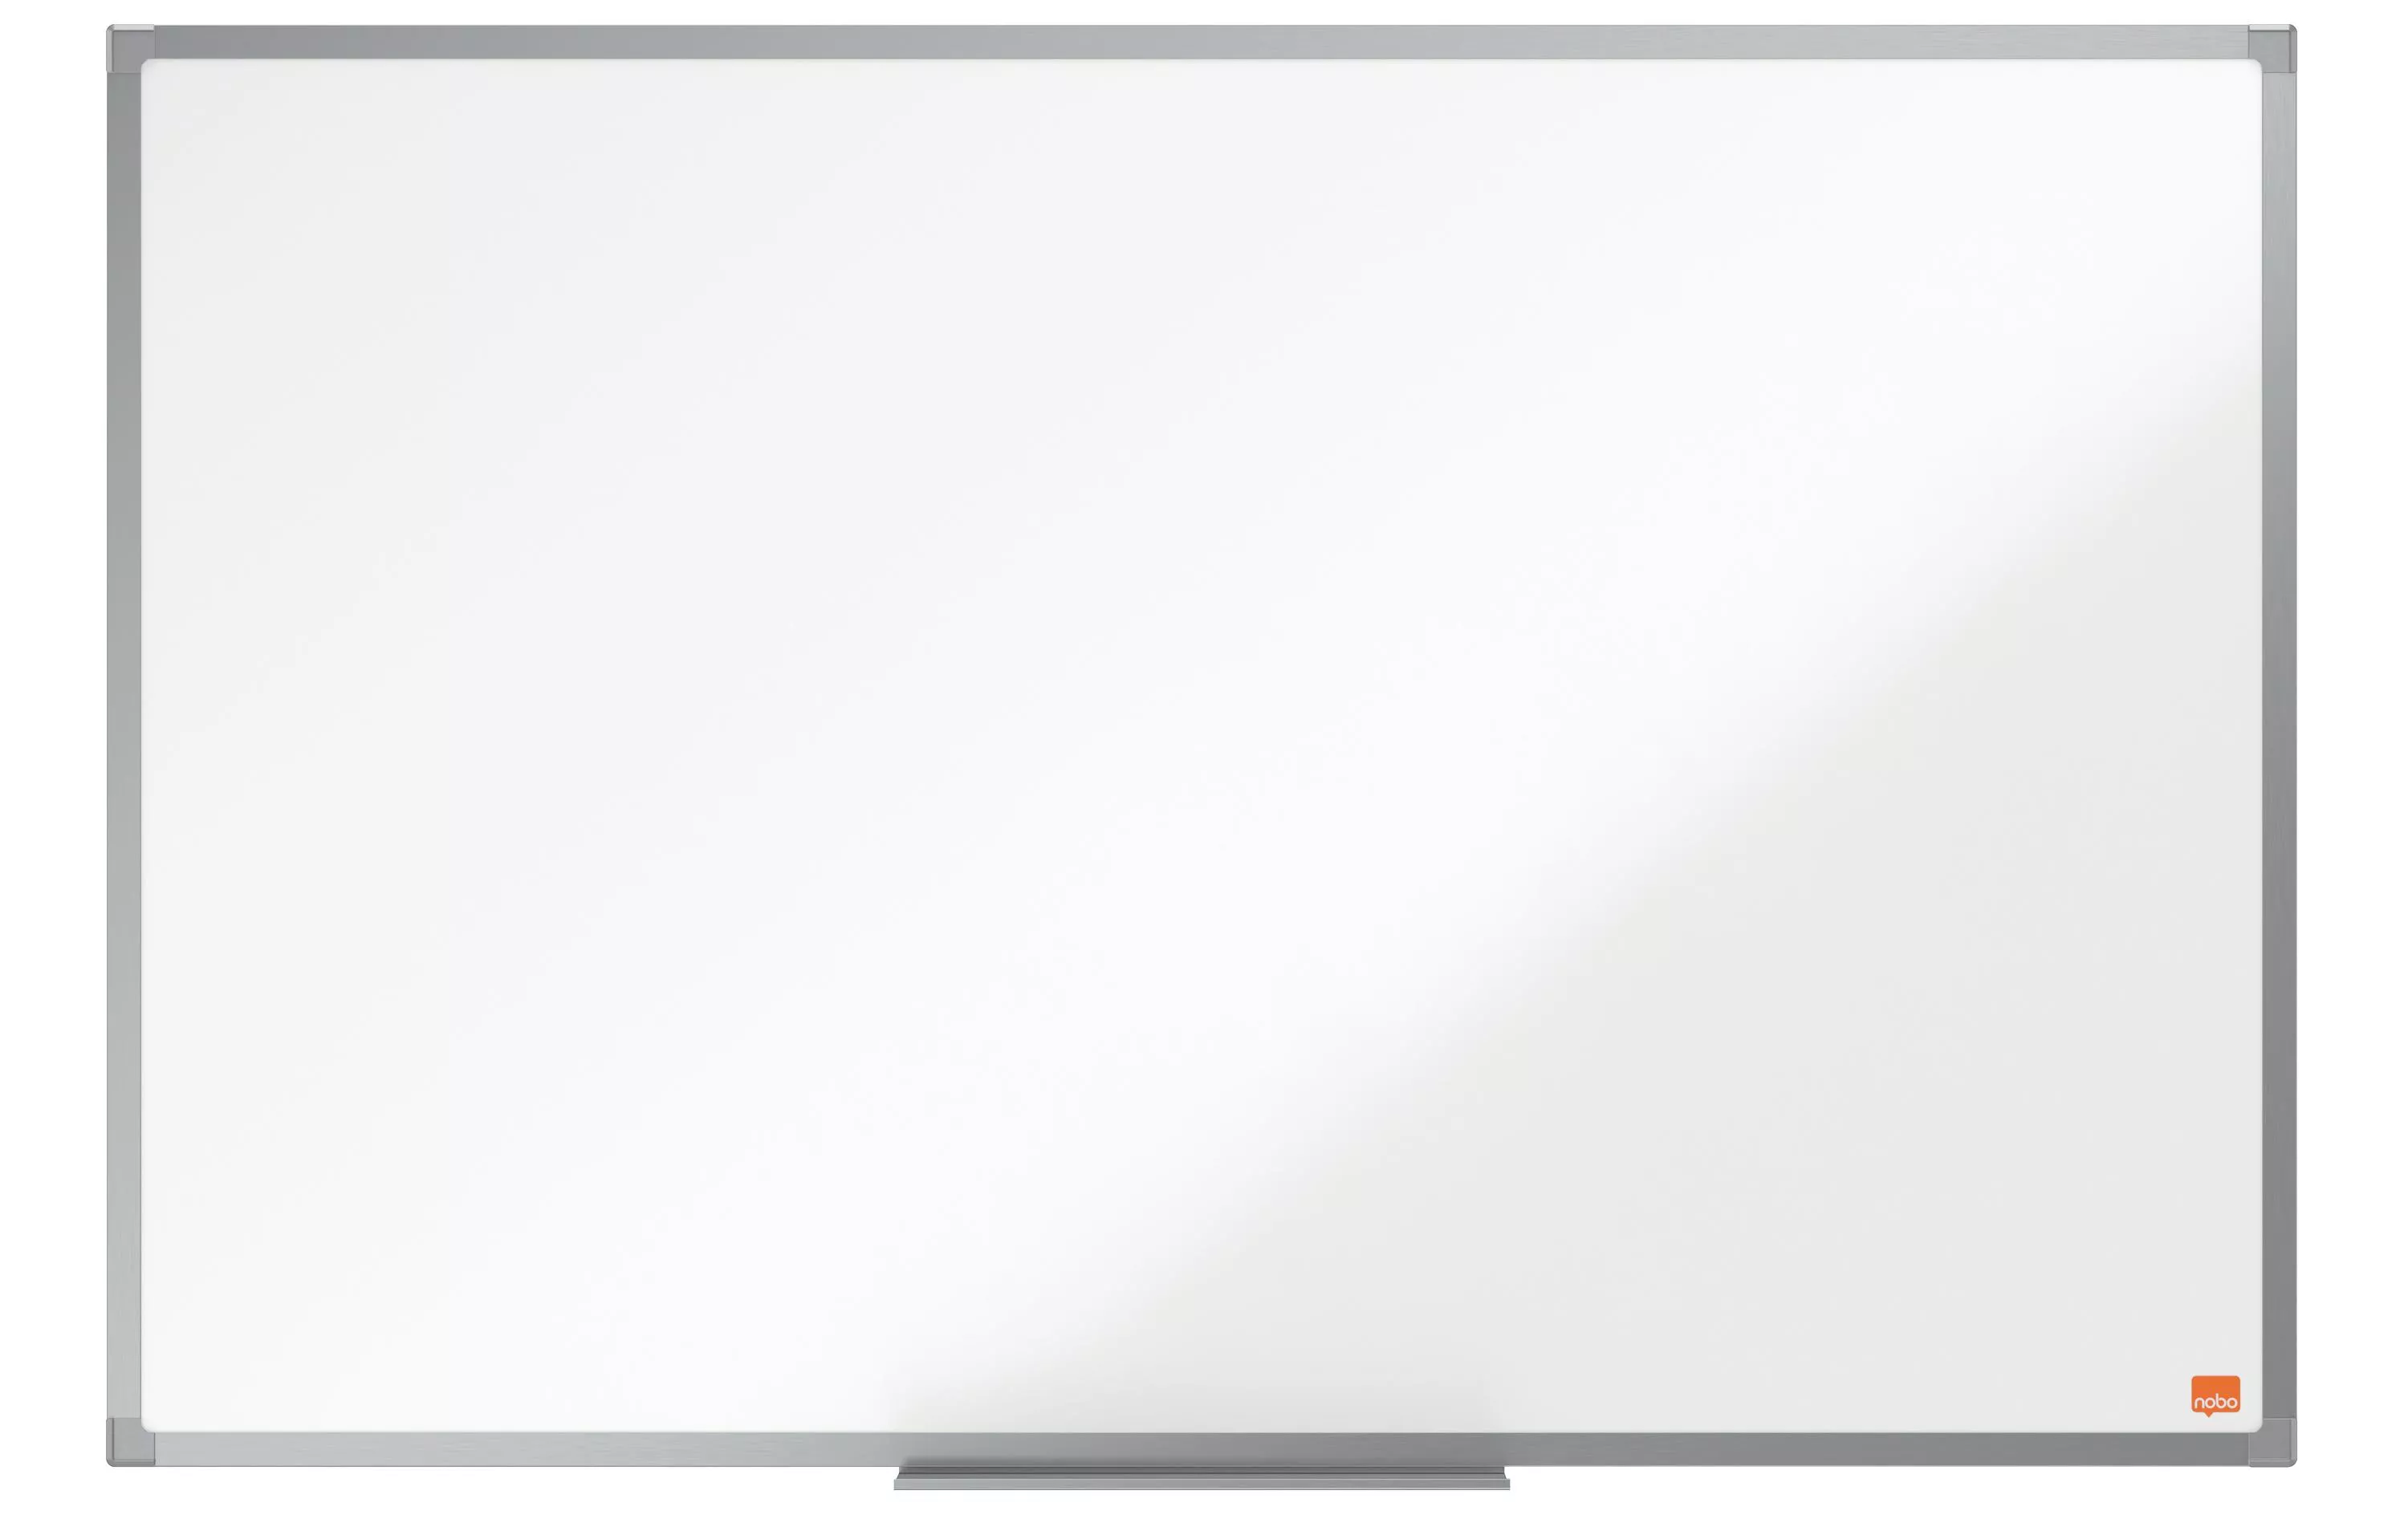 Magnethaftendes Whiteboard Essence 60 cm x 90 cm, Weiss